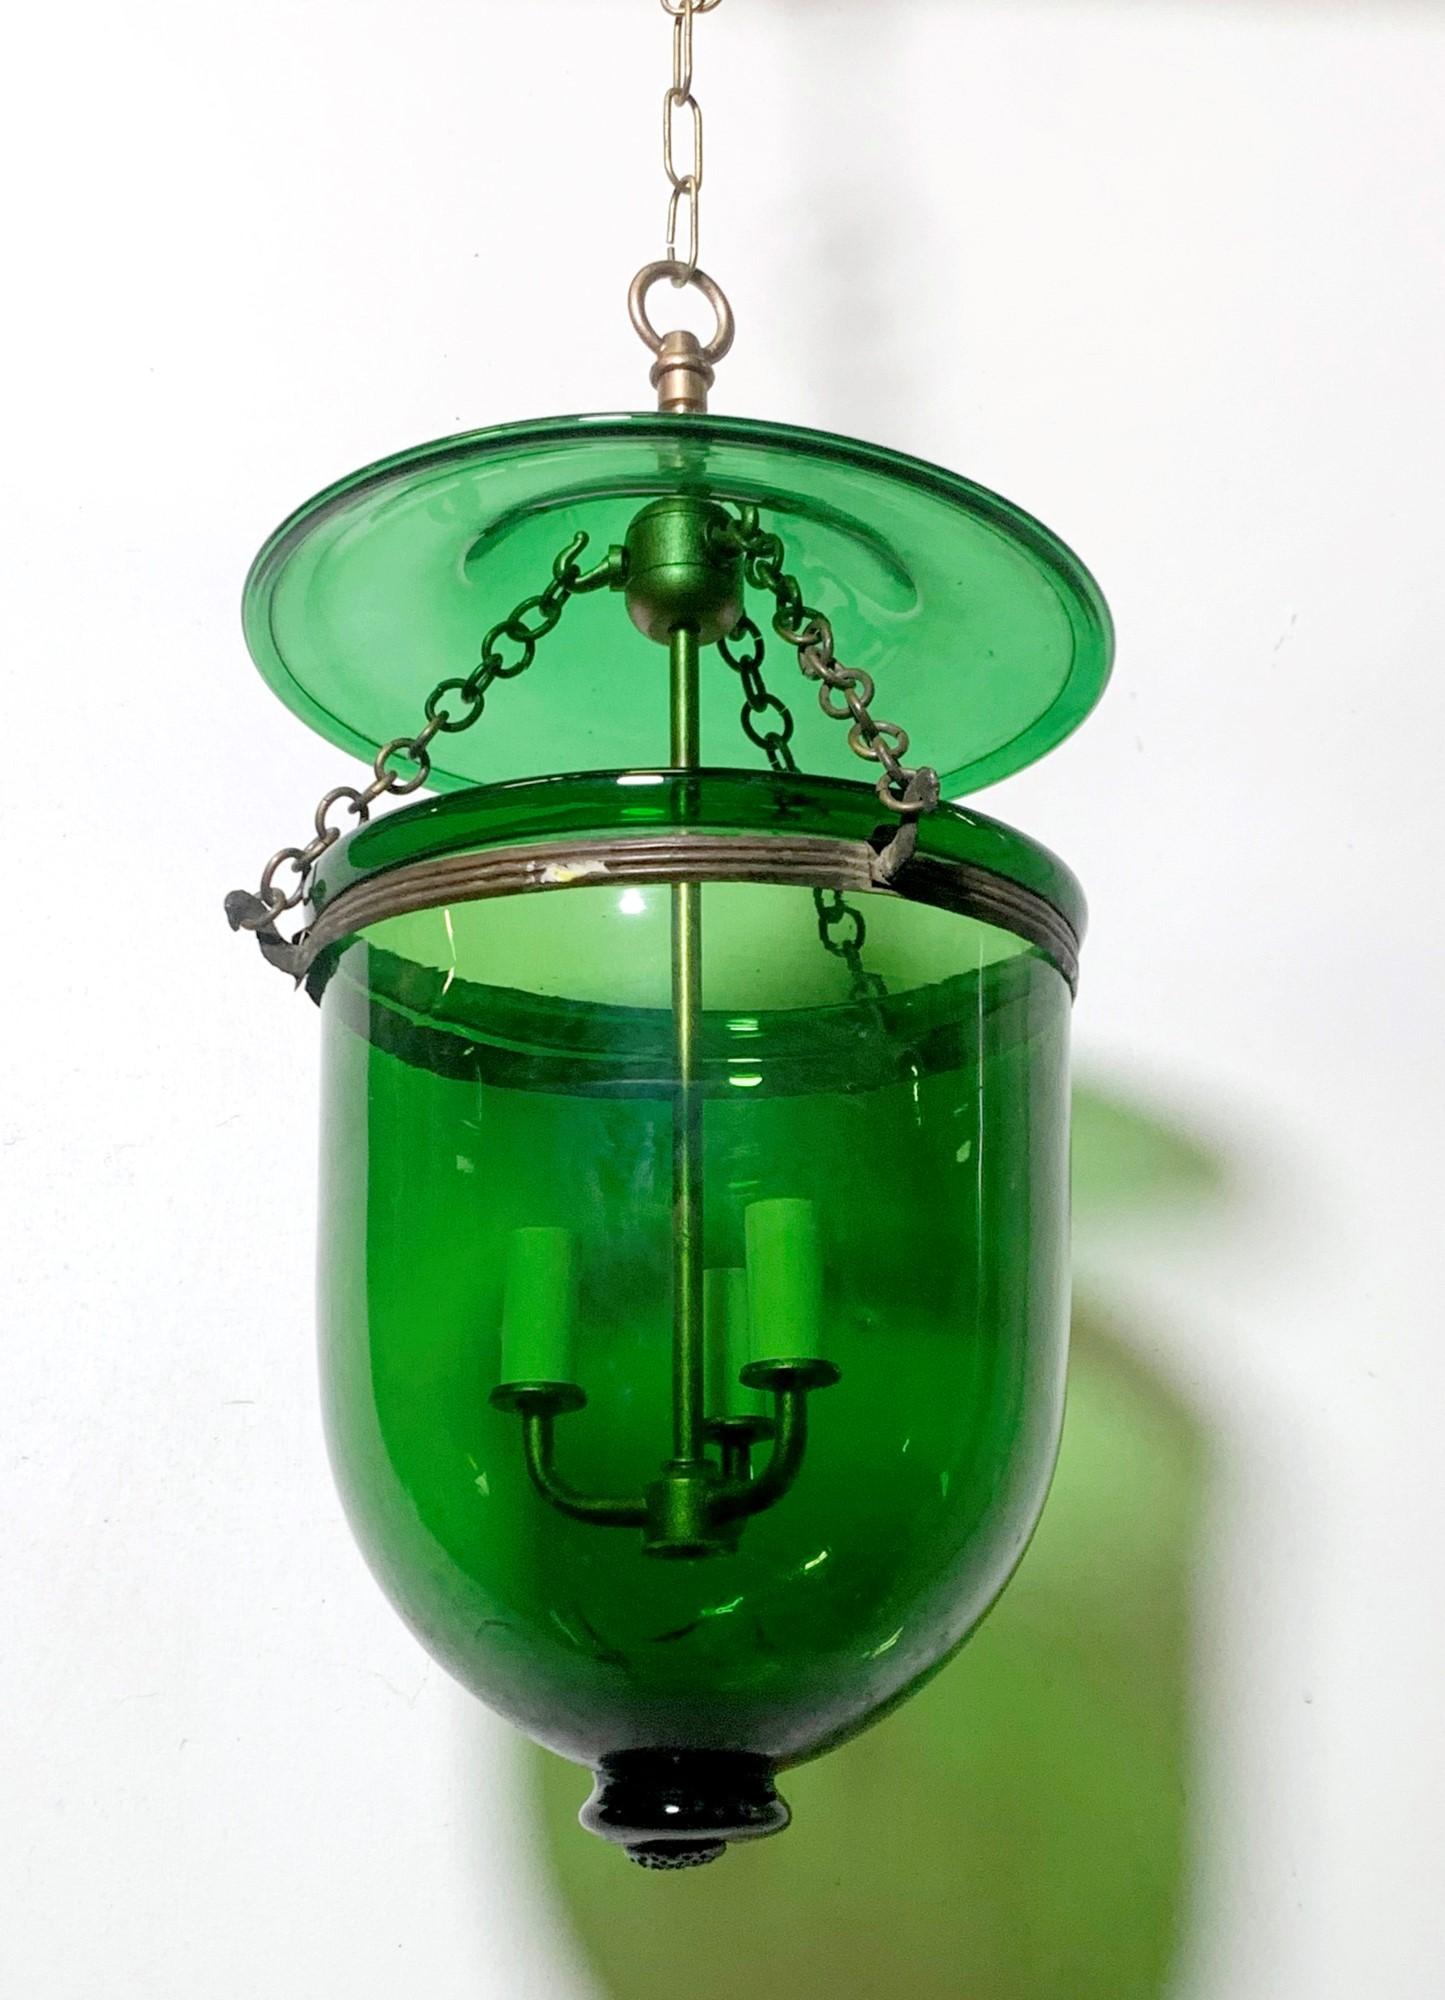 Antique early 20th Century hand blown green glass bell jar pendant light fixture with a matching lid. New brass finished hardware. This can be seen at our 400 Gilligan St location in Scranton, PA.